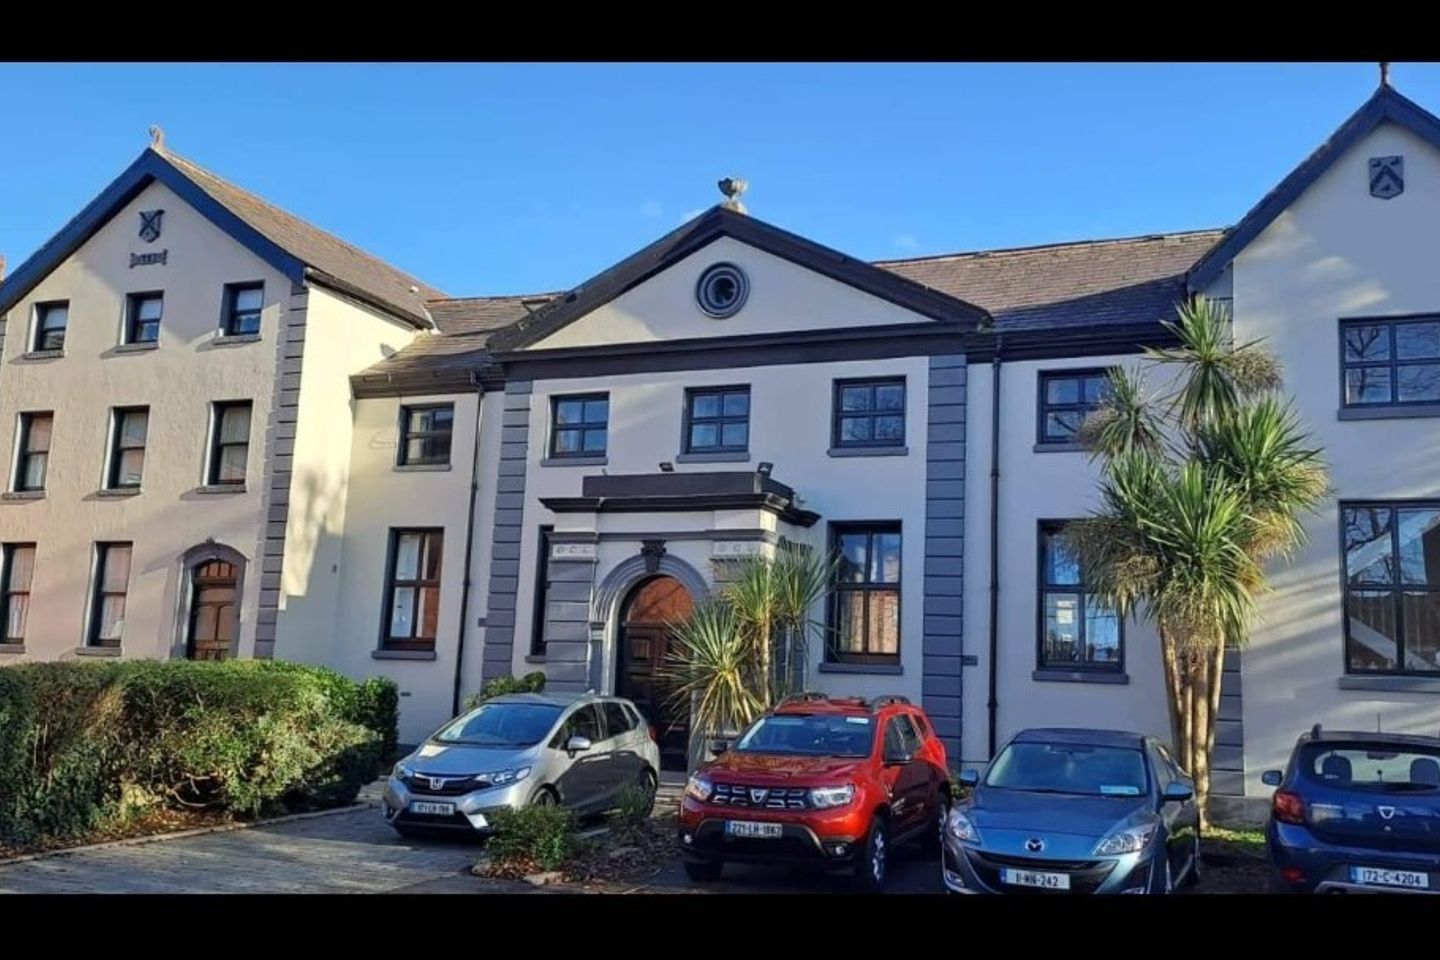 Apartment 5, Library Apartments, Dundalk, Co. Louth, A91XV32